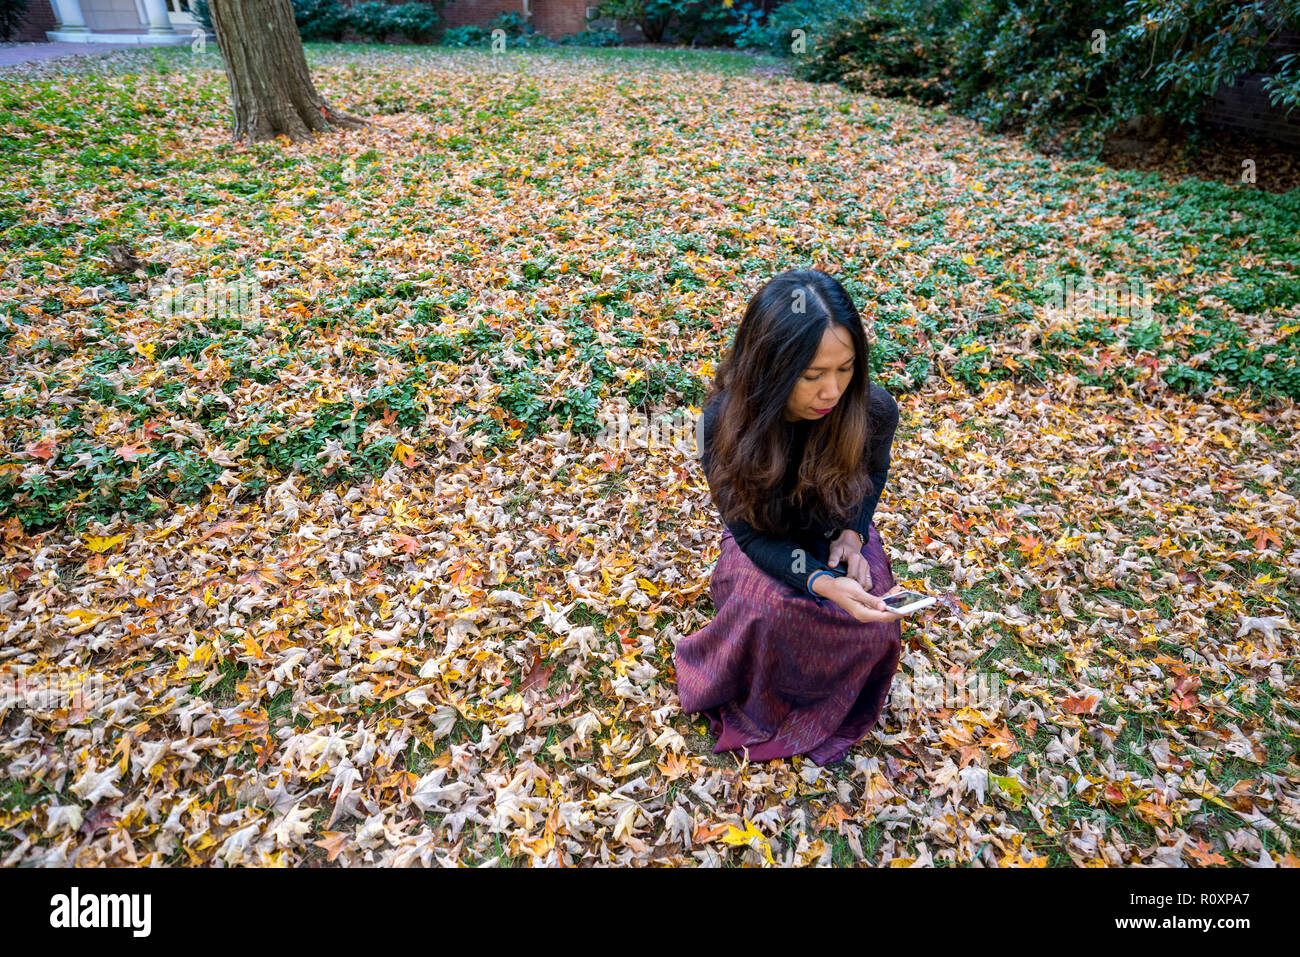 Thai woman kneeling on ground surrounded by leaves in the fall looking at camera looking at mobile phone Stock Photo